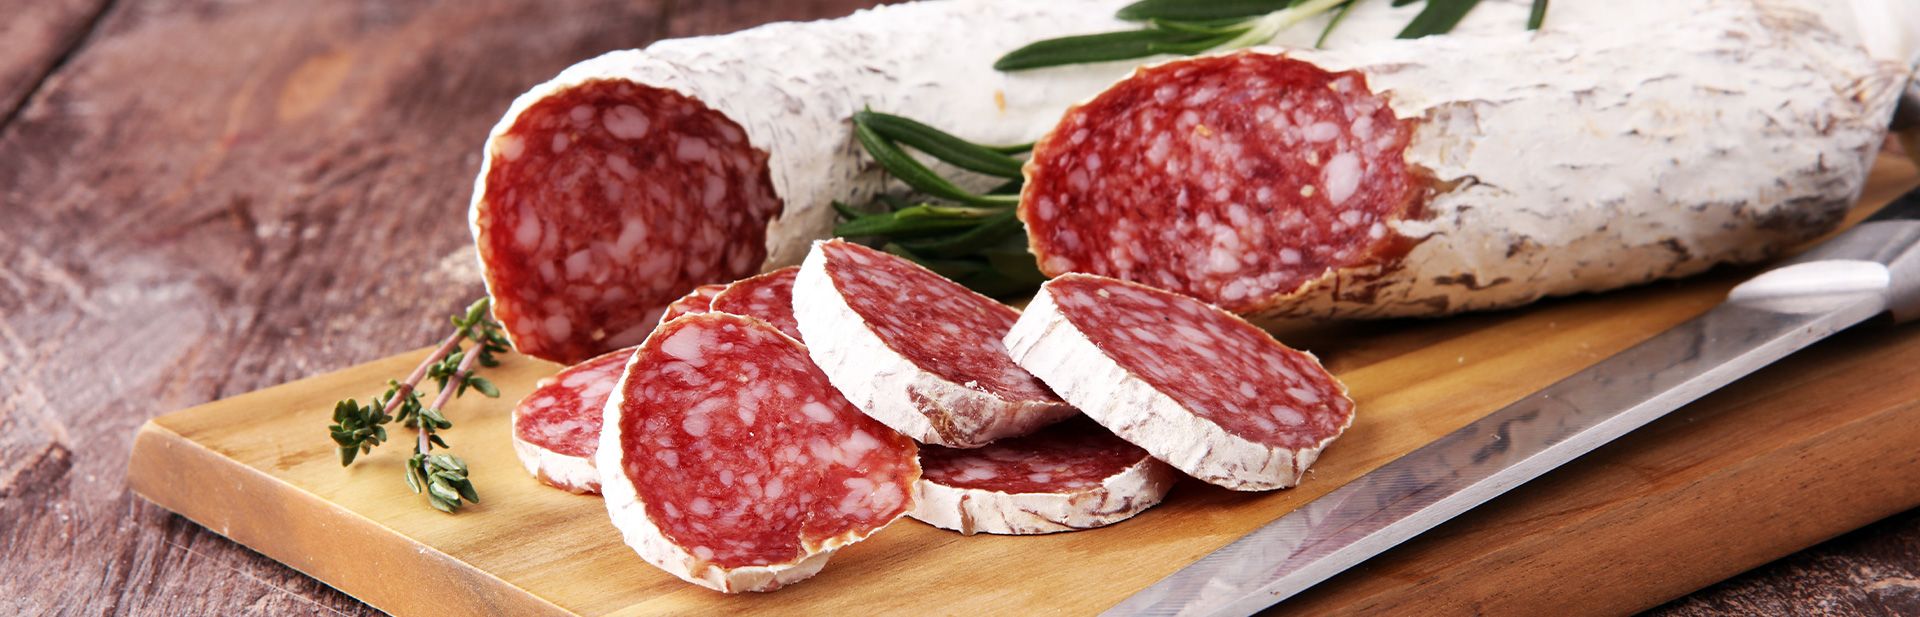 Raw sausage & cured meat products